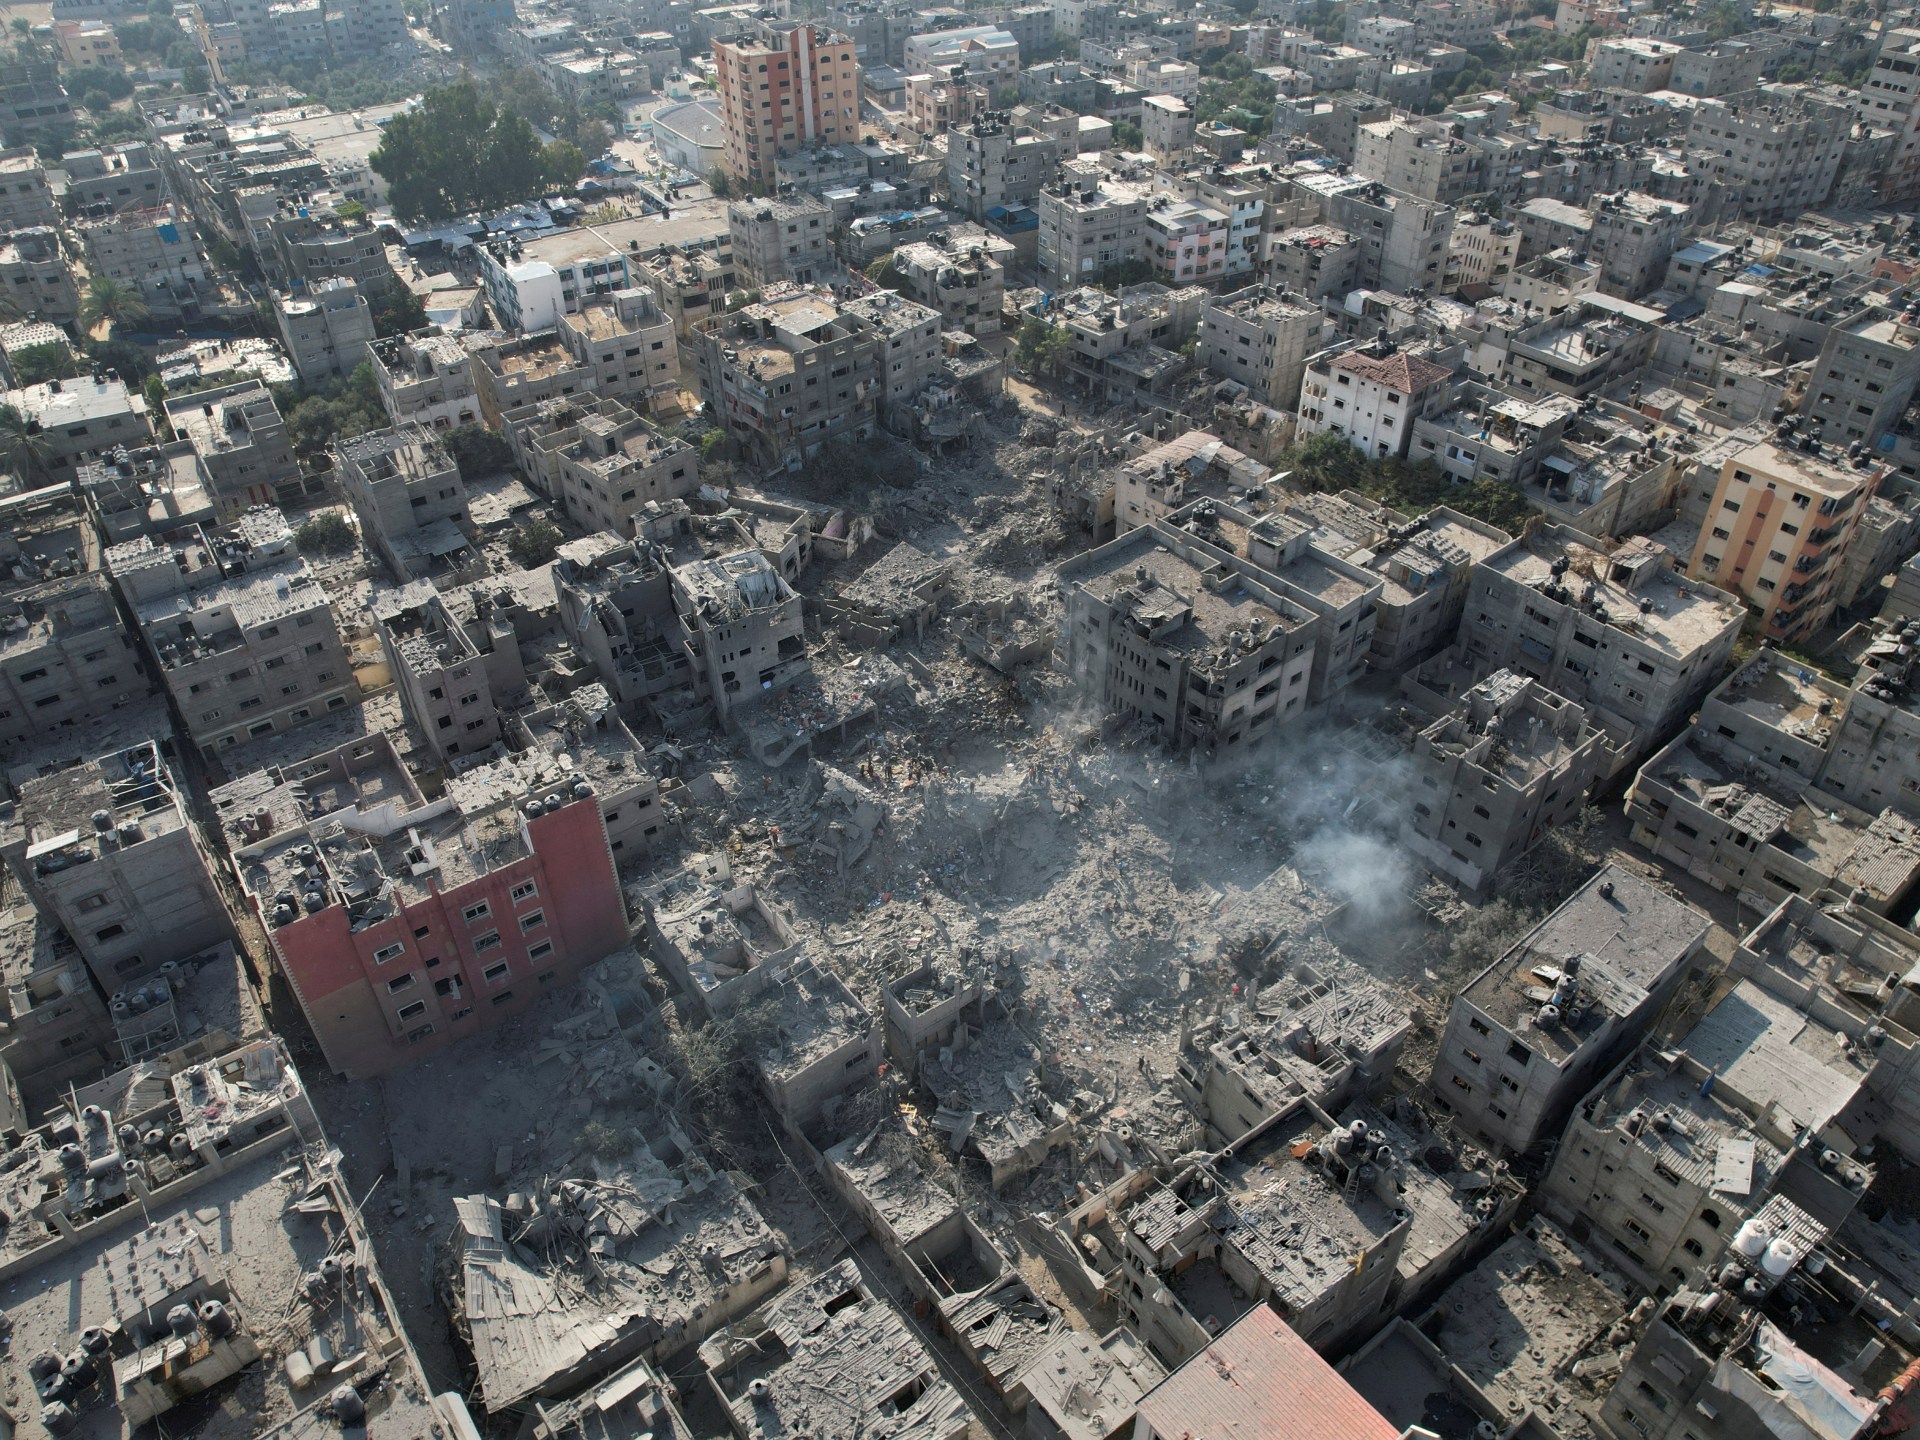 Covering Gaza: Dehumanisation of an entire population | Opinions